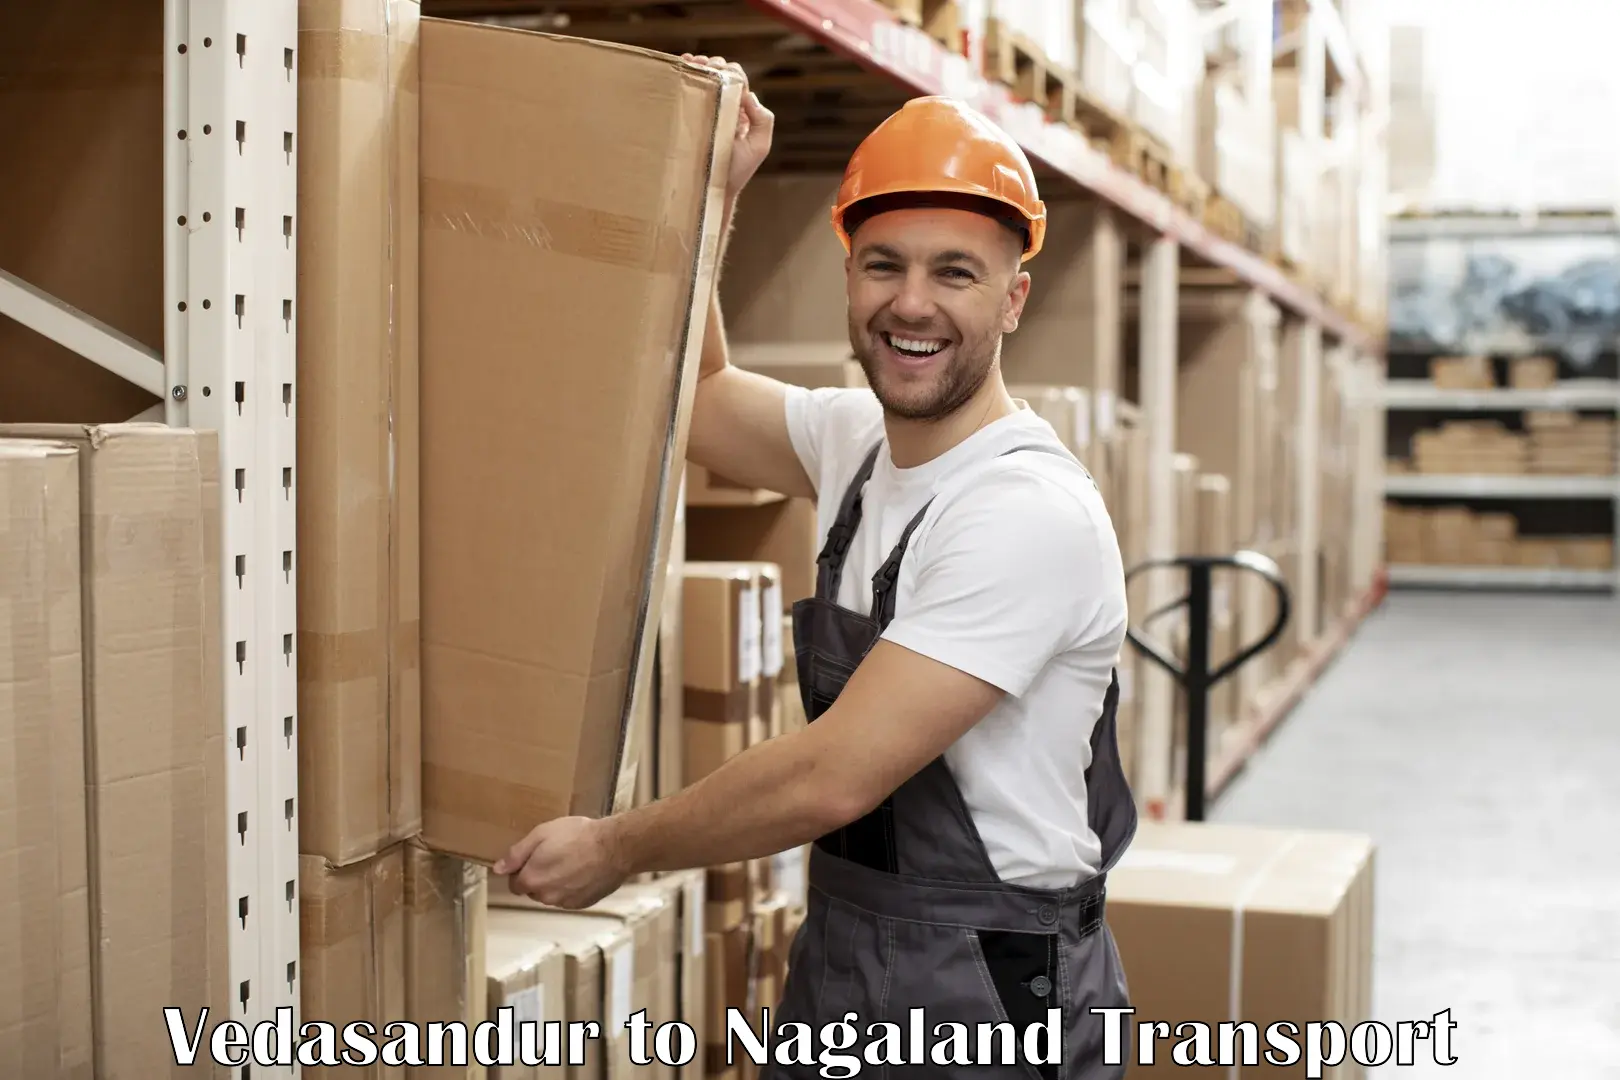 Part load transport service in India Vedasandur to Nagaland